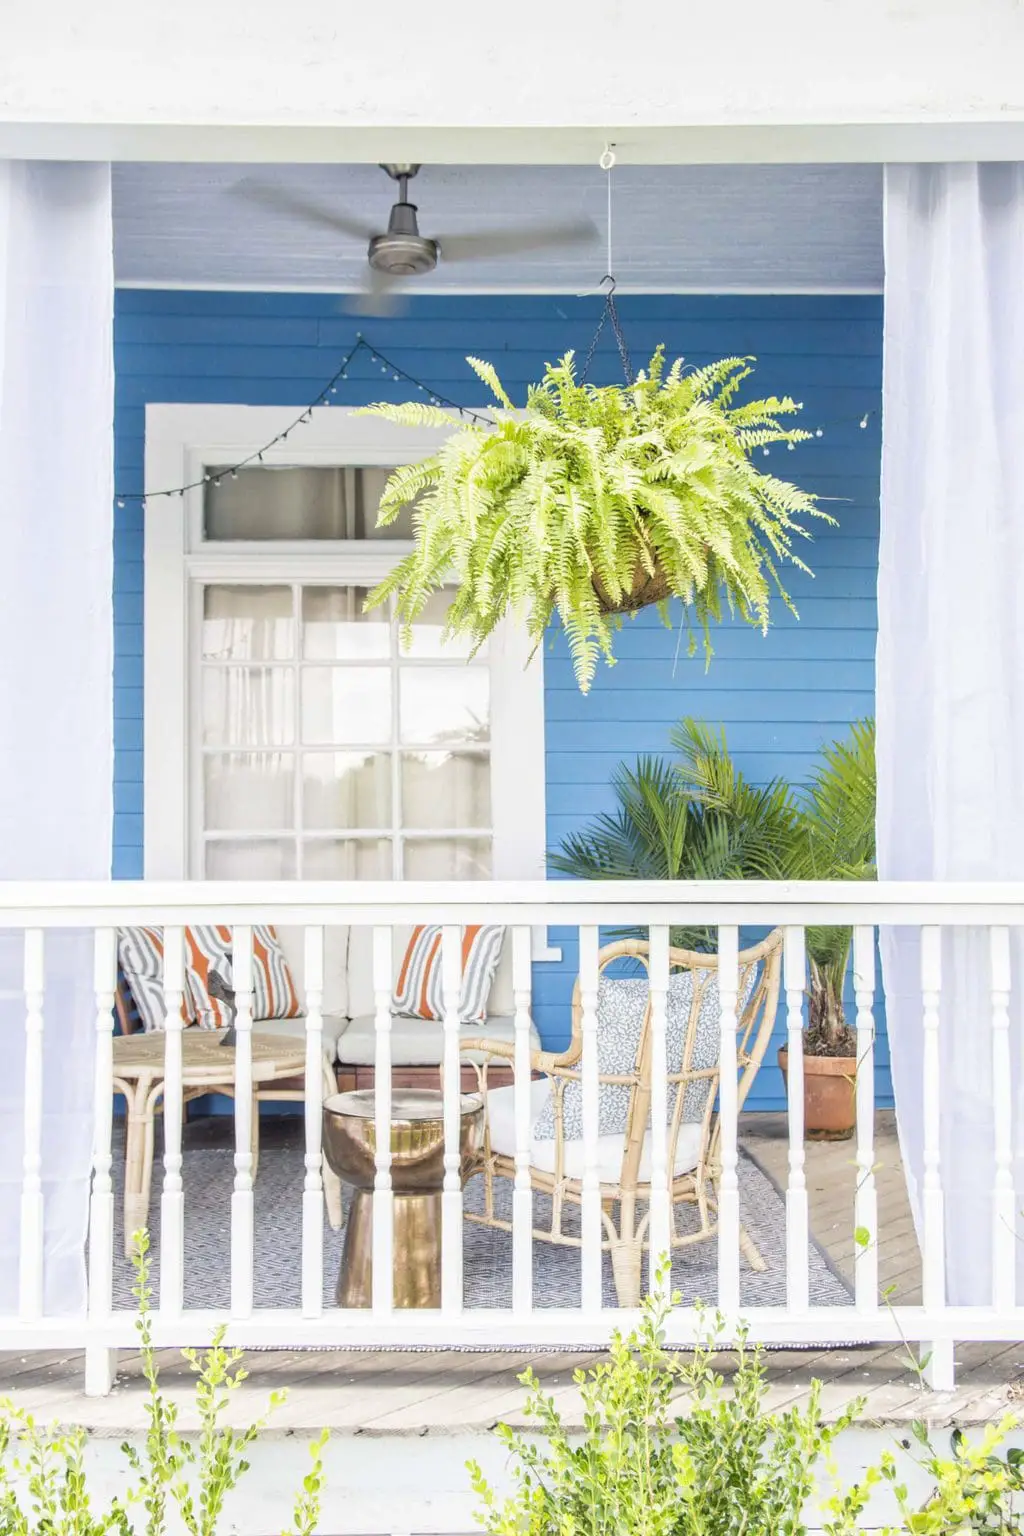 Tye Street Project porch makeover reveal on Thou Swell @thouswellblog